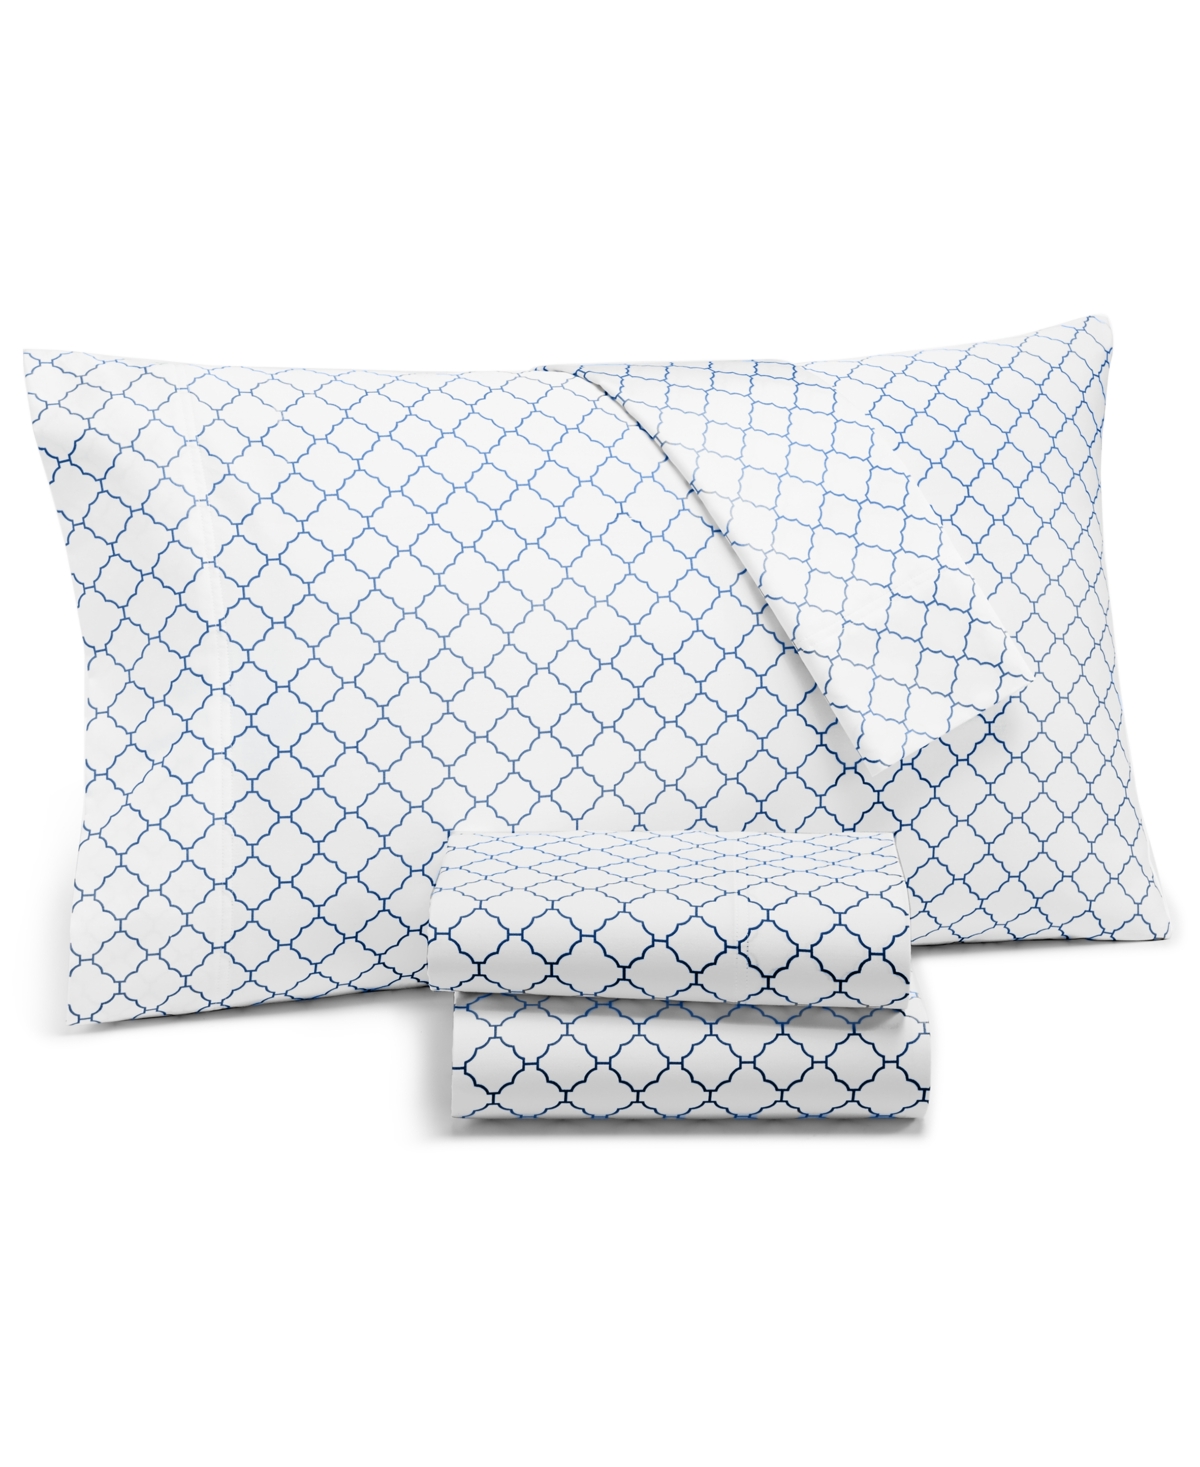 Charter Club Damask Designs 550 Thread Count Printed Cotton 4-pc. Sheet Set, Full, Created For Macy's In Arabesque Geo Cornflower